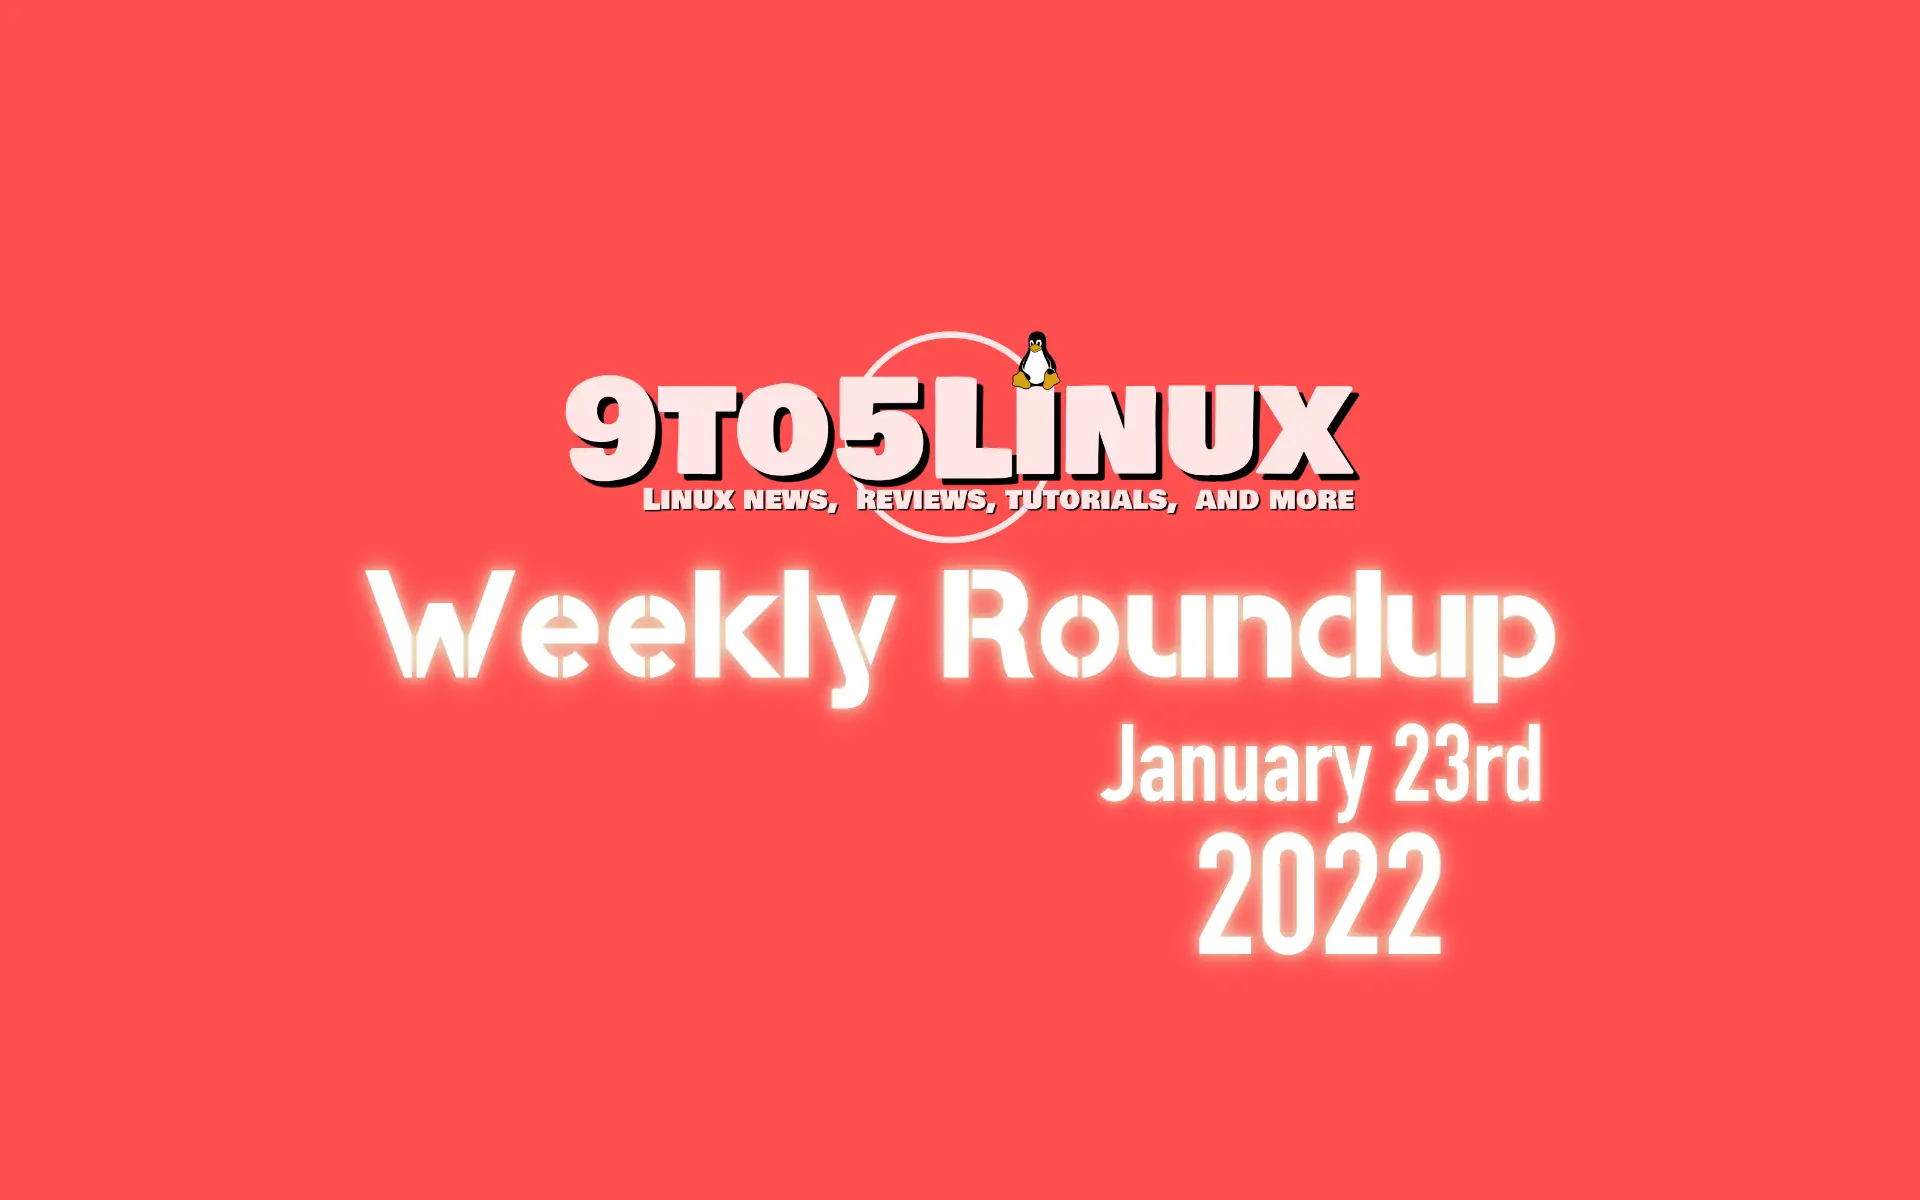 9to5Linux Weekly Roundup: January 23rd, 2022